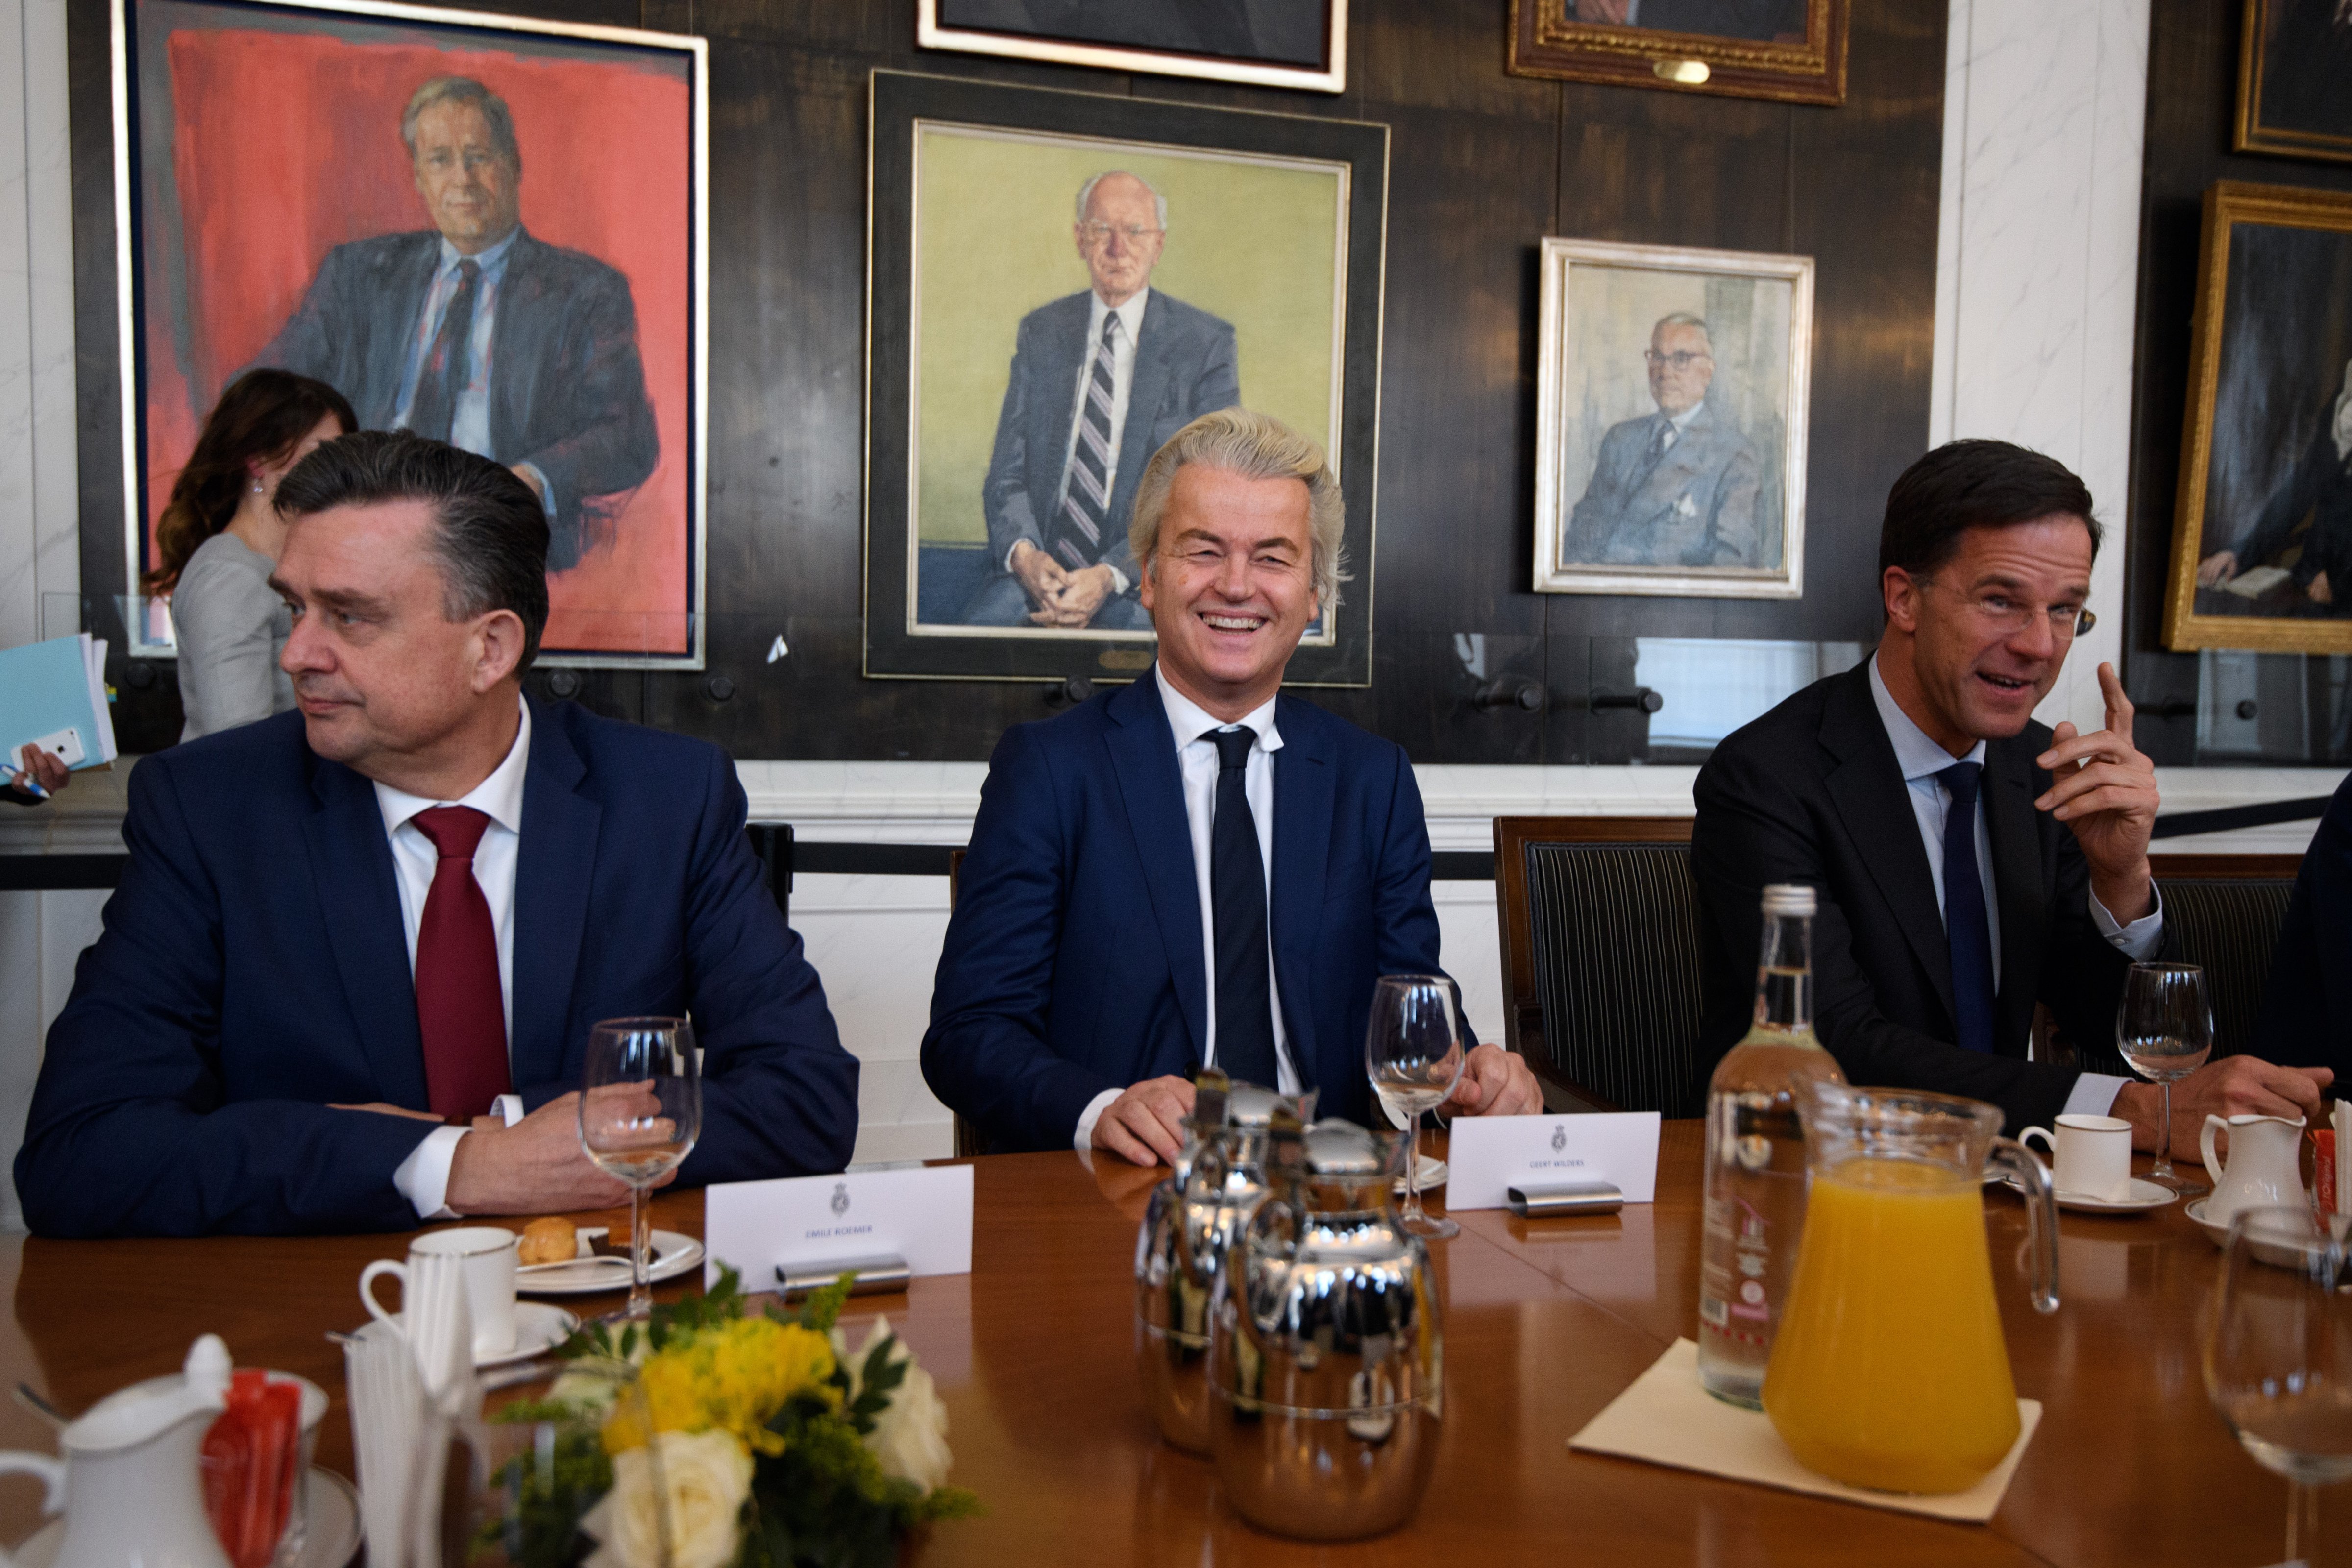 THE HAGUE, NETHERLANDS - MARCH 16:(L-R) Emile Roemer, leader of the Socialist Party; Party for Freedom (PVV) leader Geert Wilders and Dutch Prime Minister Mark Rutte attend a meeting of Dutch political party leaders at the House of Representatives to express their views on the formation of the cabinet, on March 16, 2017 in The Hague, Netherlands.